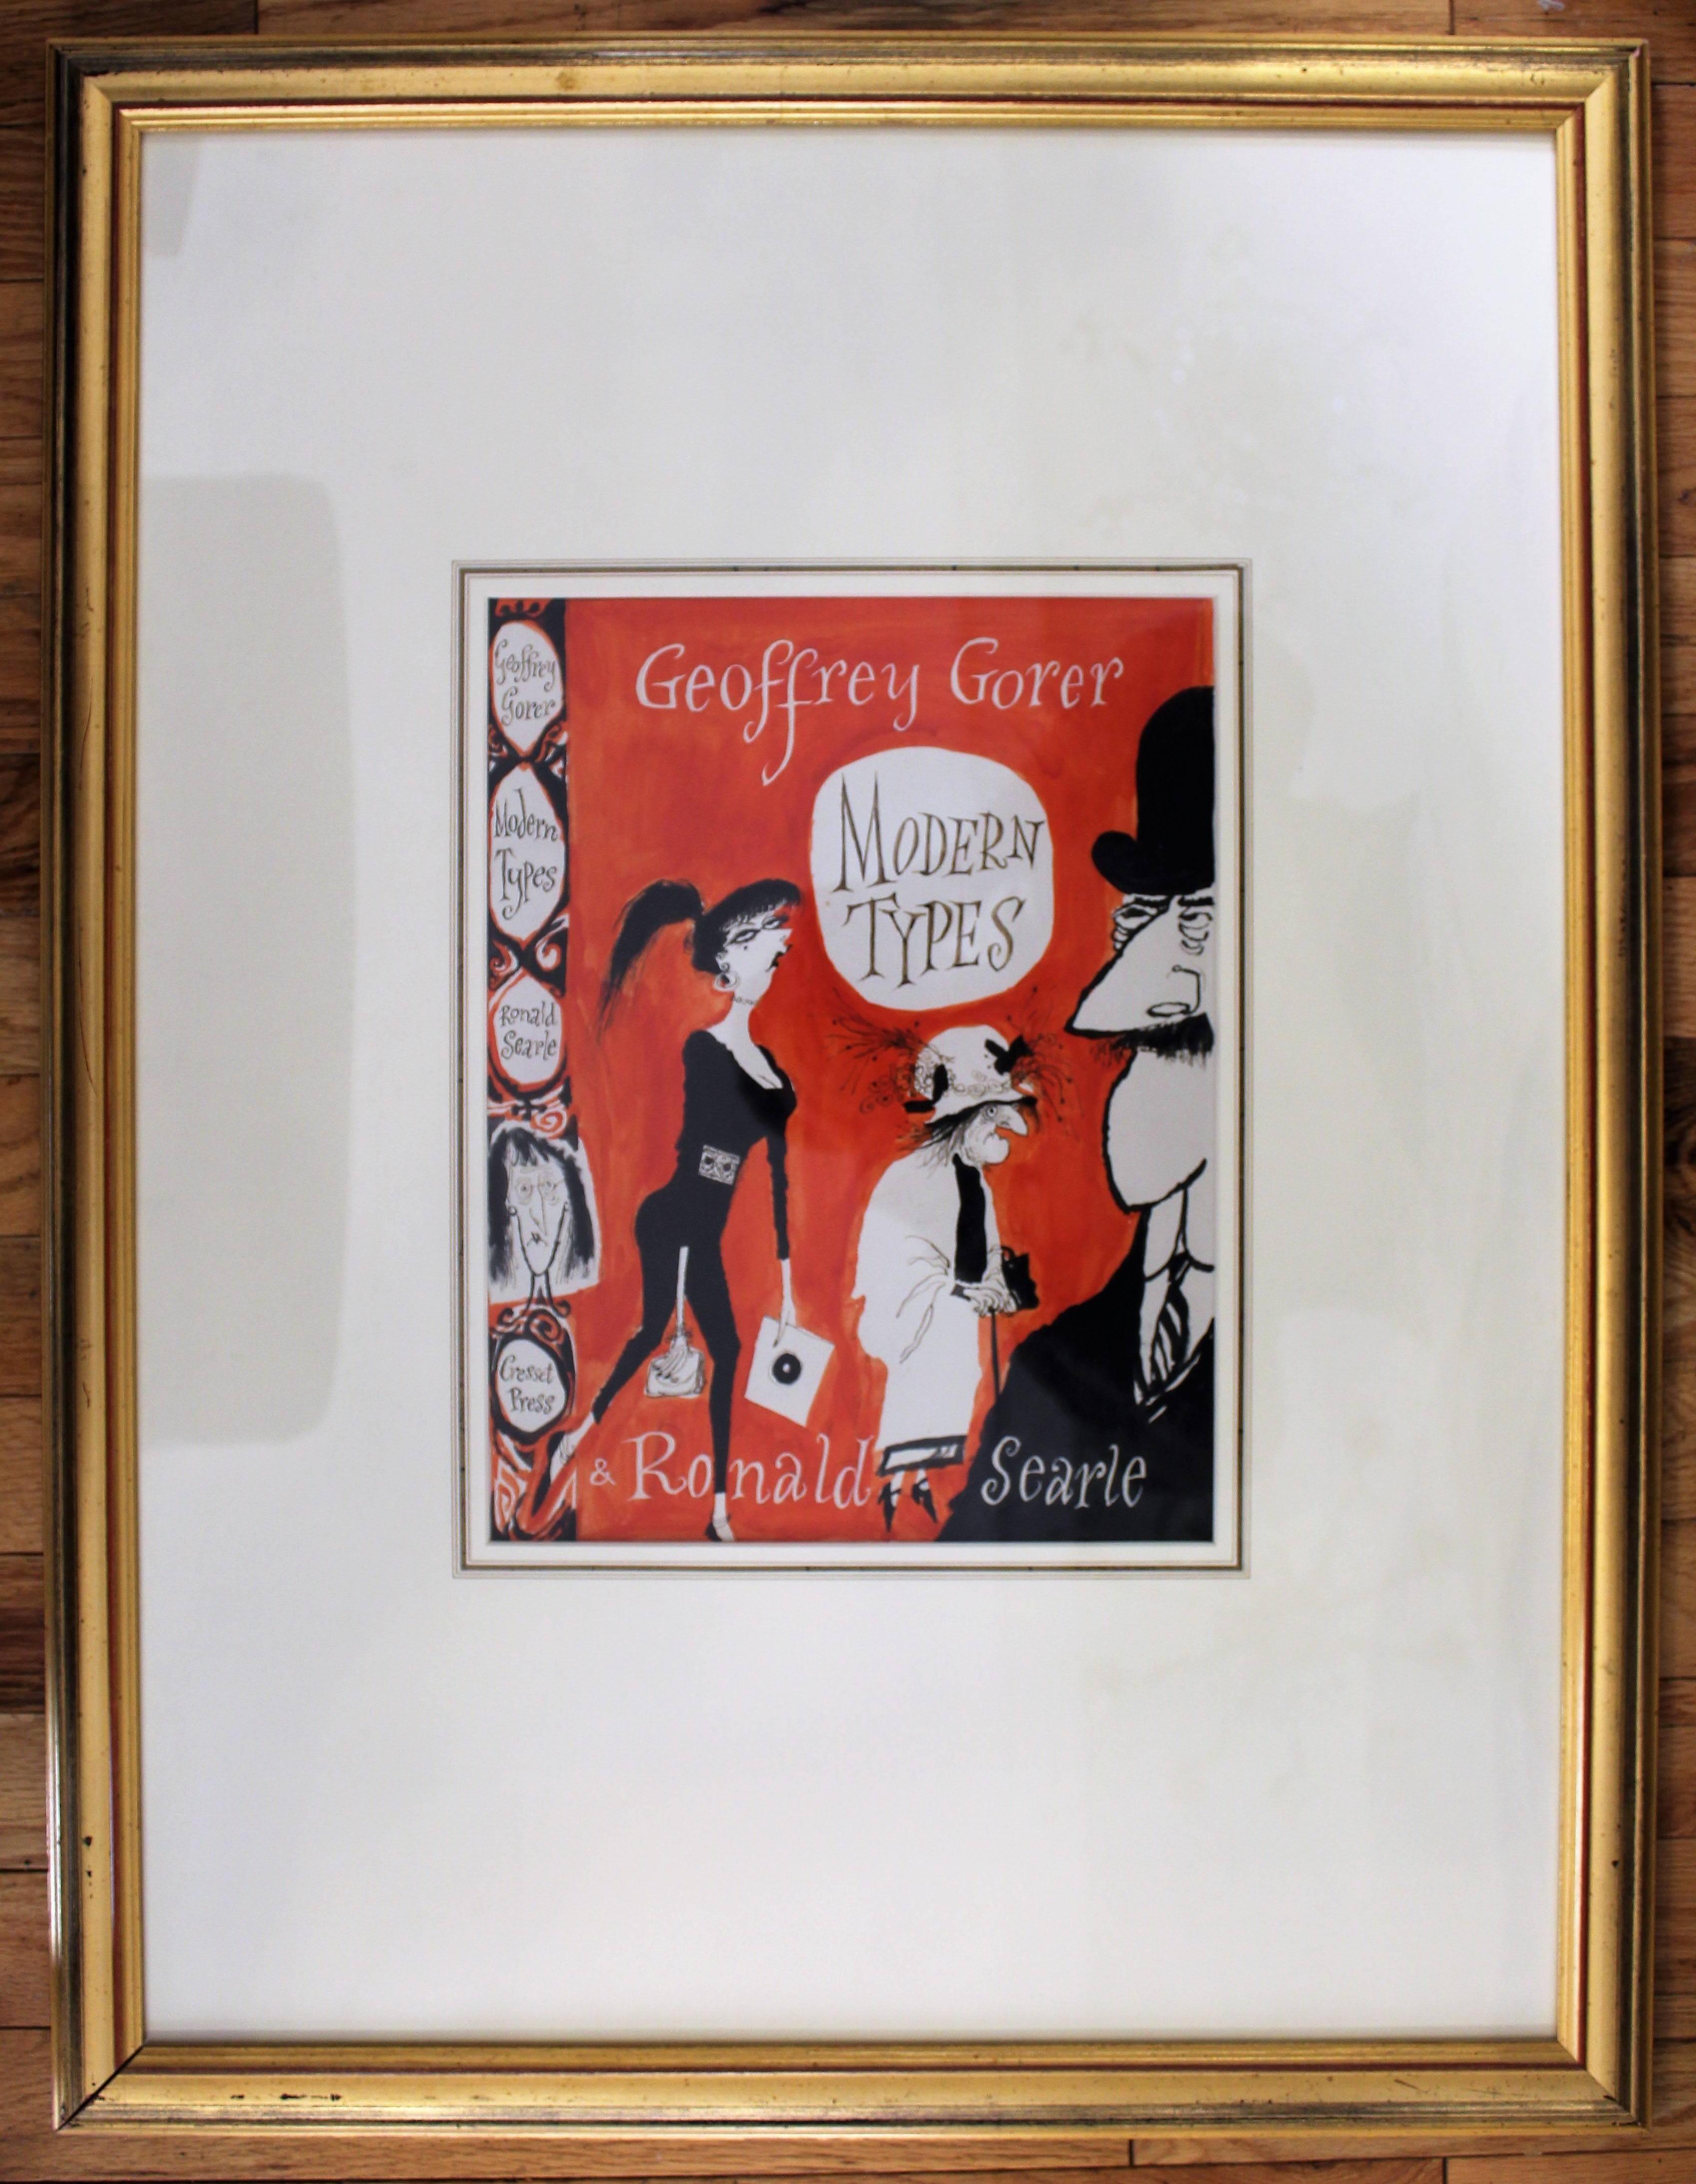 Ronald Searle painting for 'Modern Types' book cover
Medium: Watercolor and Ink
Size
Without Frame: 13" high x 10" wide
With Frame: 28" high x 21" wide

Ronald Searle, (born March 3, 1920, Cambridge, Cambridge shire, England—died